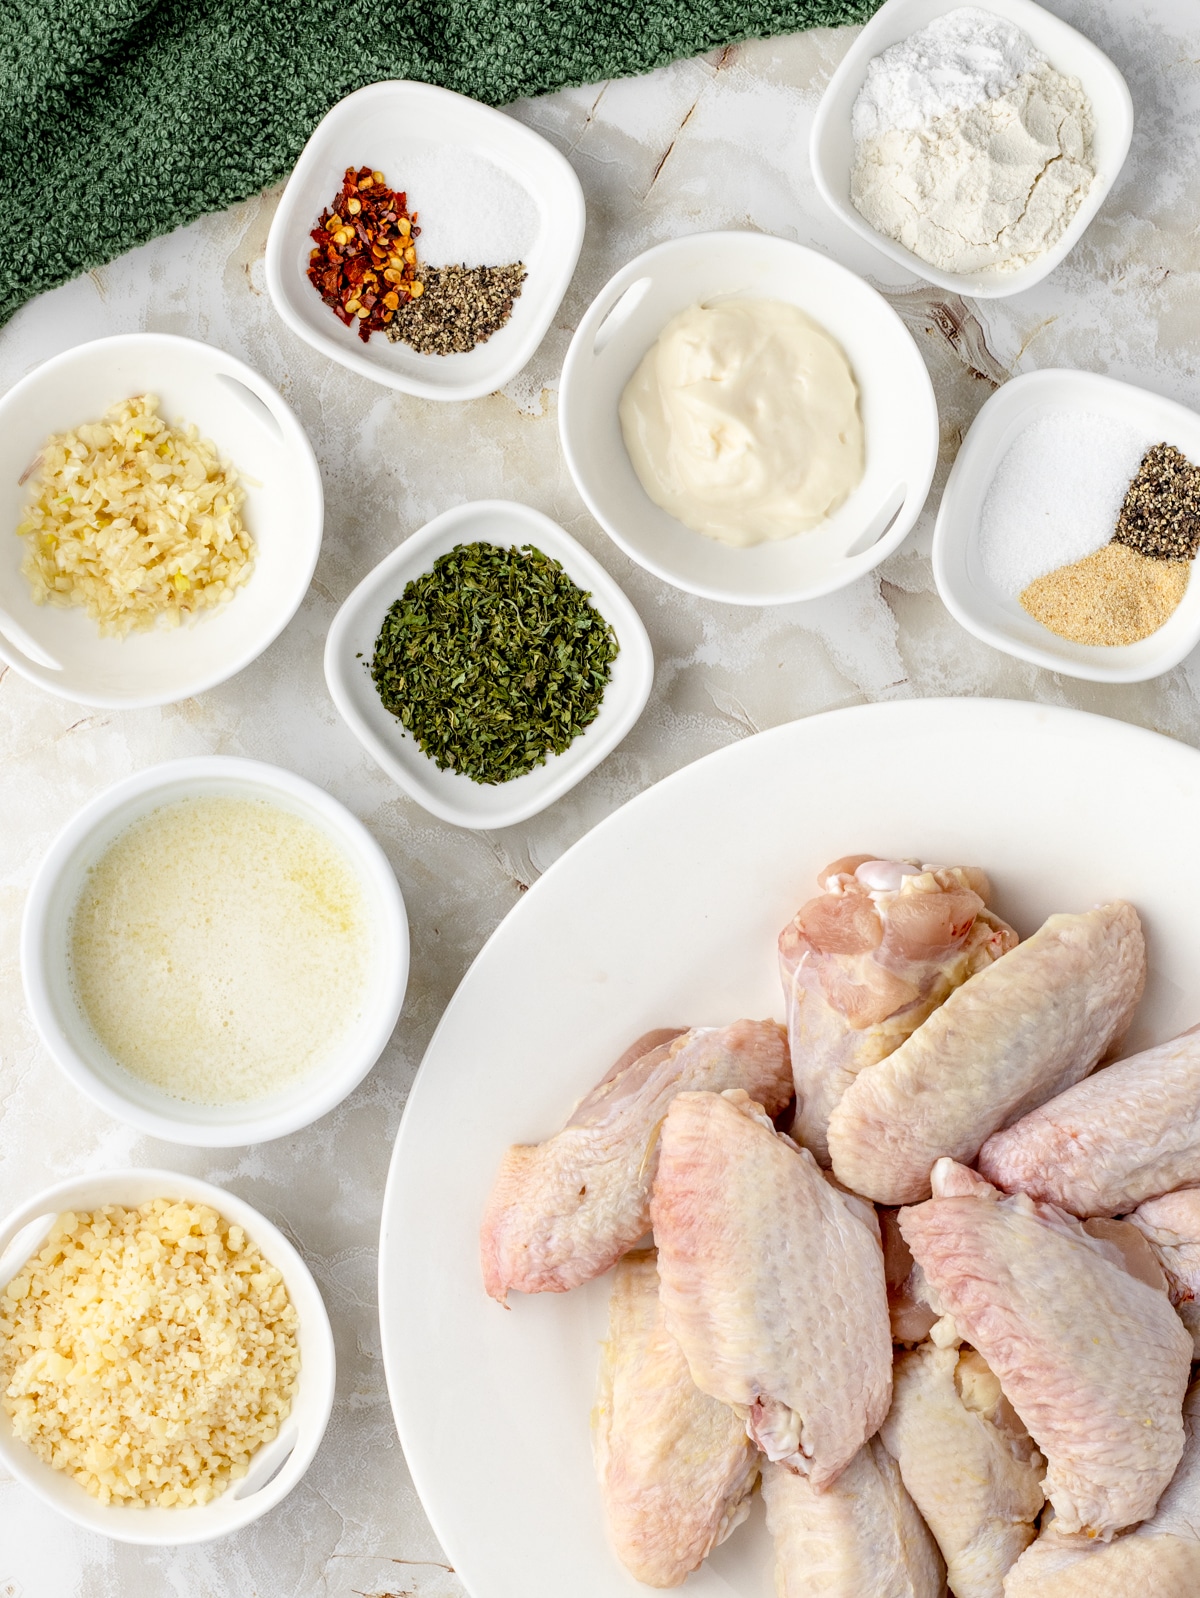 Ingredients needed for chicken wings. Chicken wings, flour, baking powder, salt, pepper, garlic powder, melted butter, mayonnaise, minced garlic, parmesan cheese, red pepper flakes, and parsley.